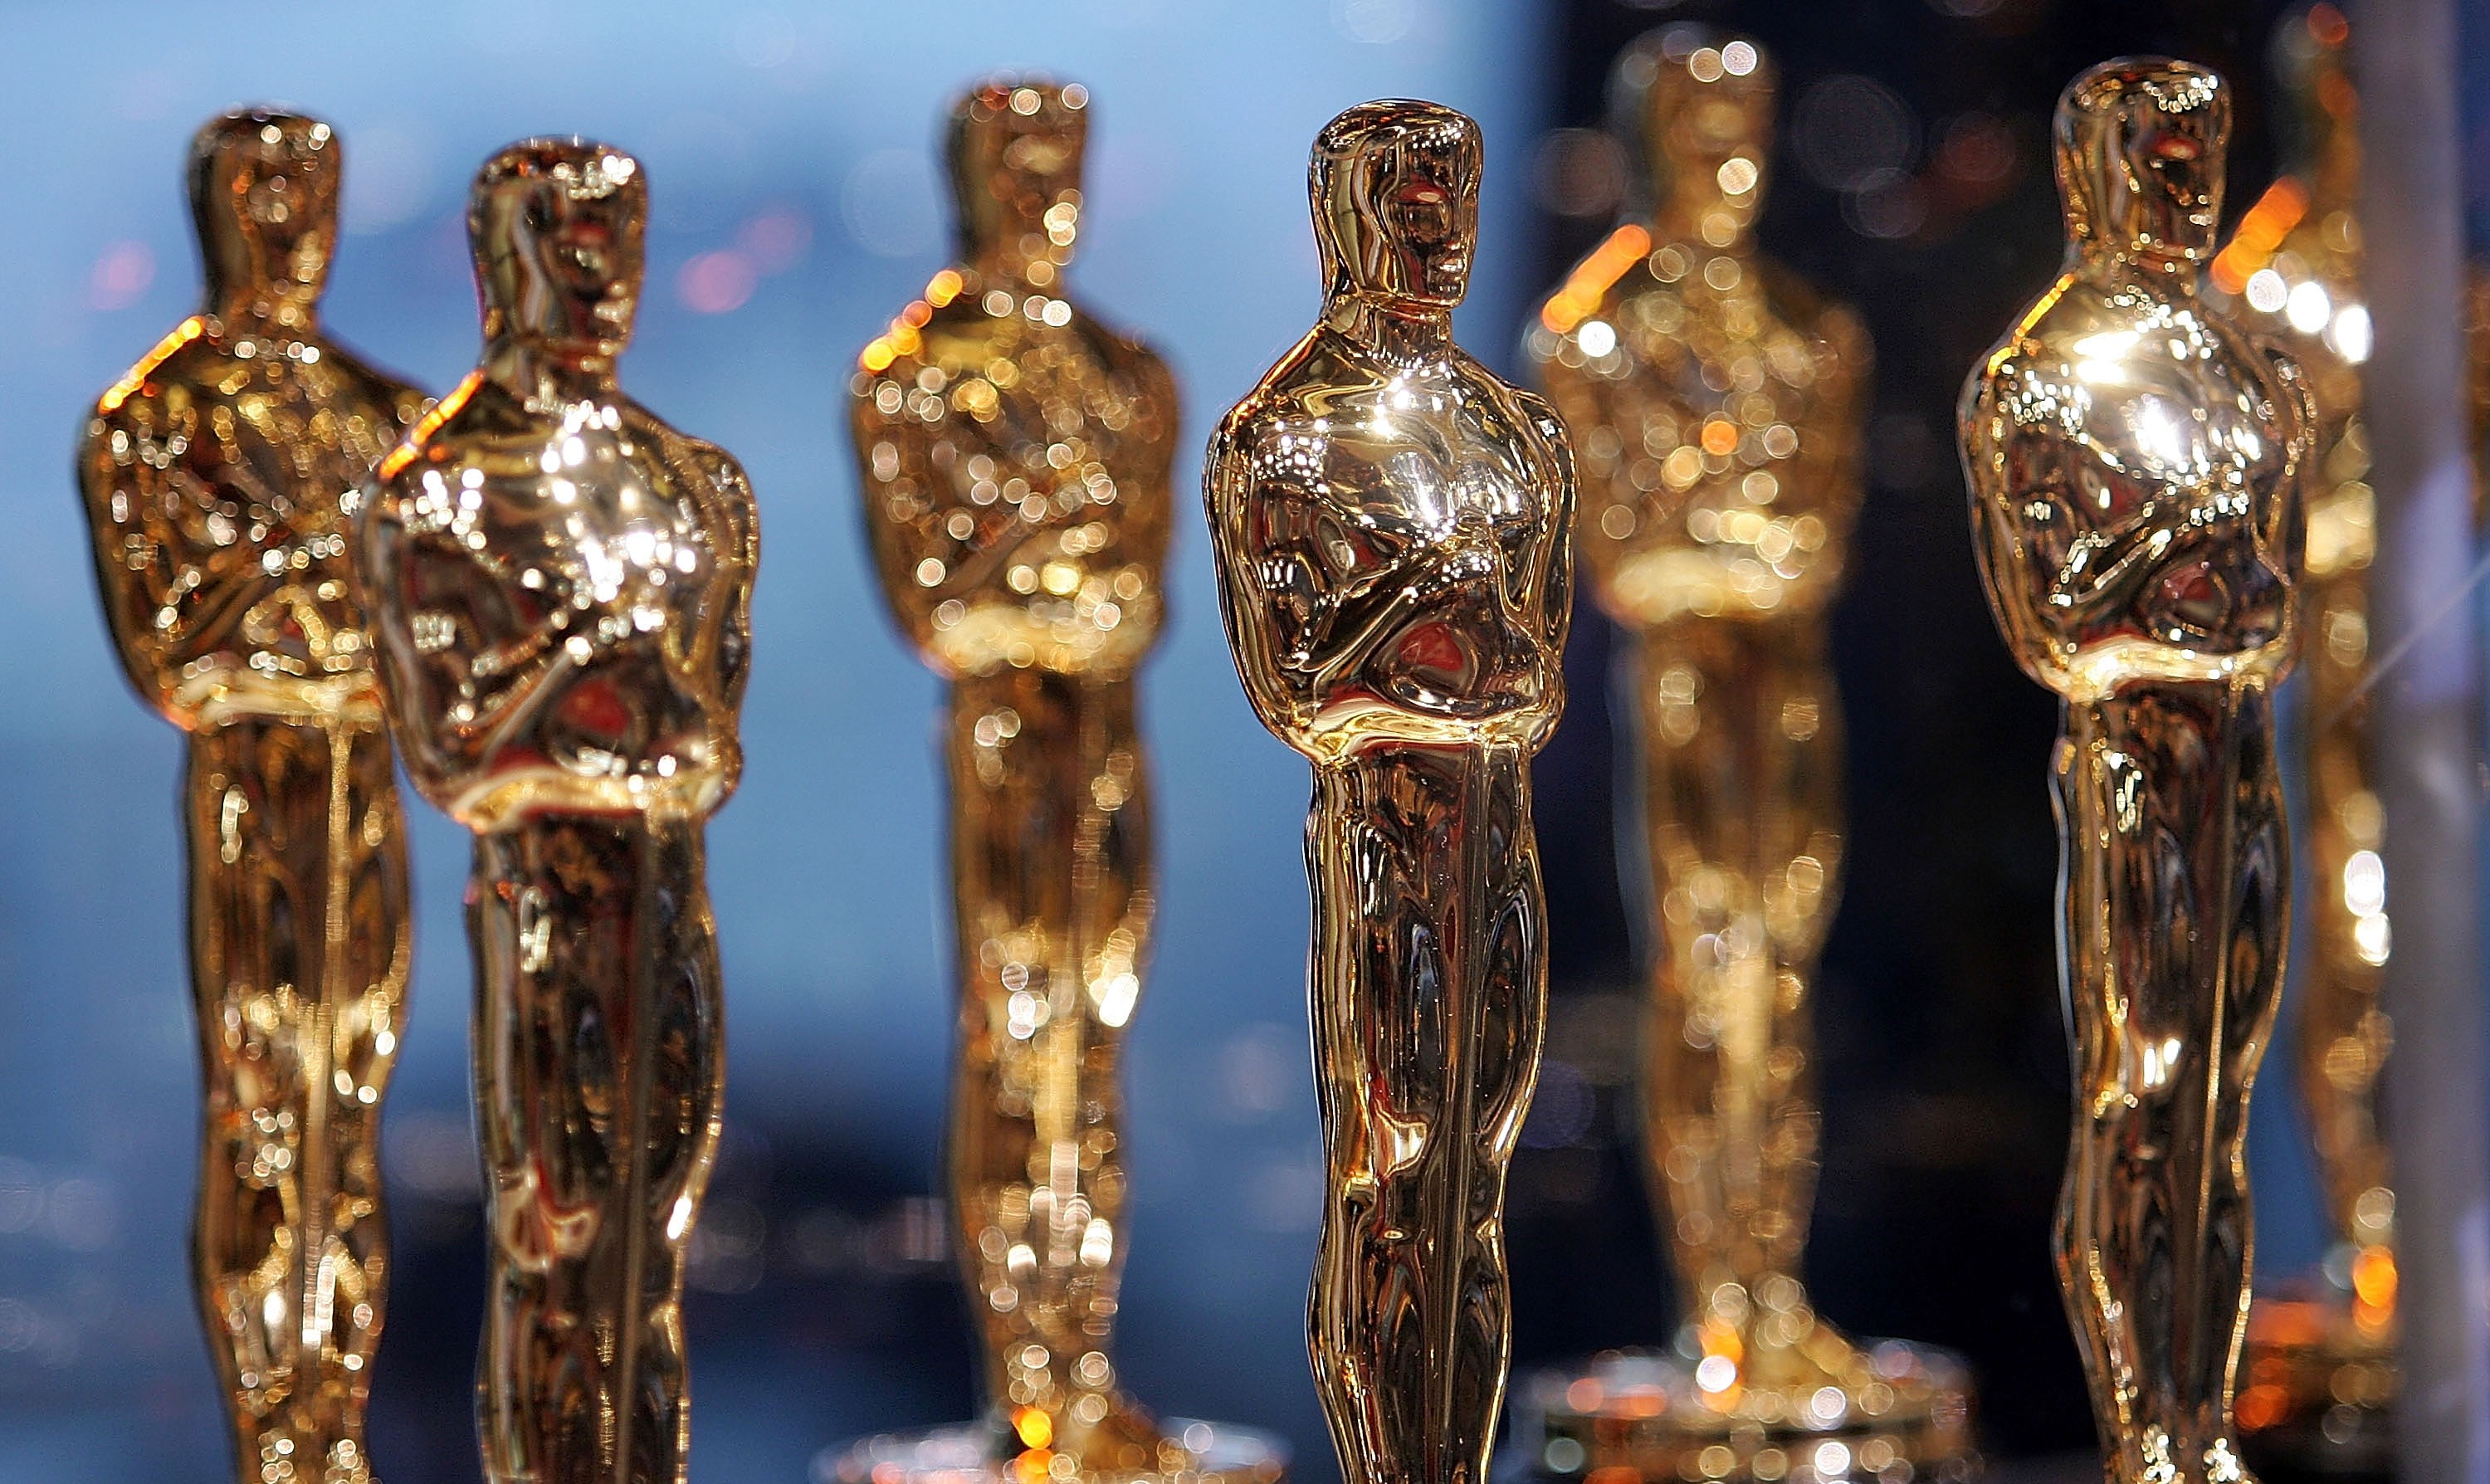 15 Oscar Movies That Were Nominated for Multiple Awards but Won Nothing